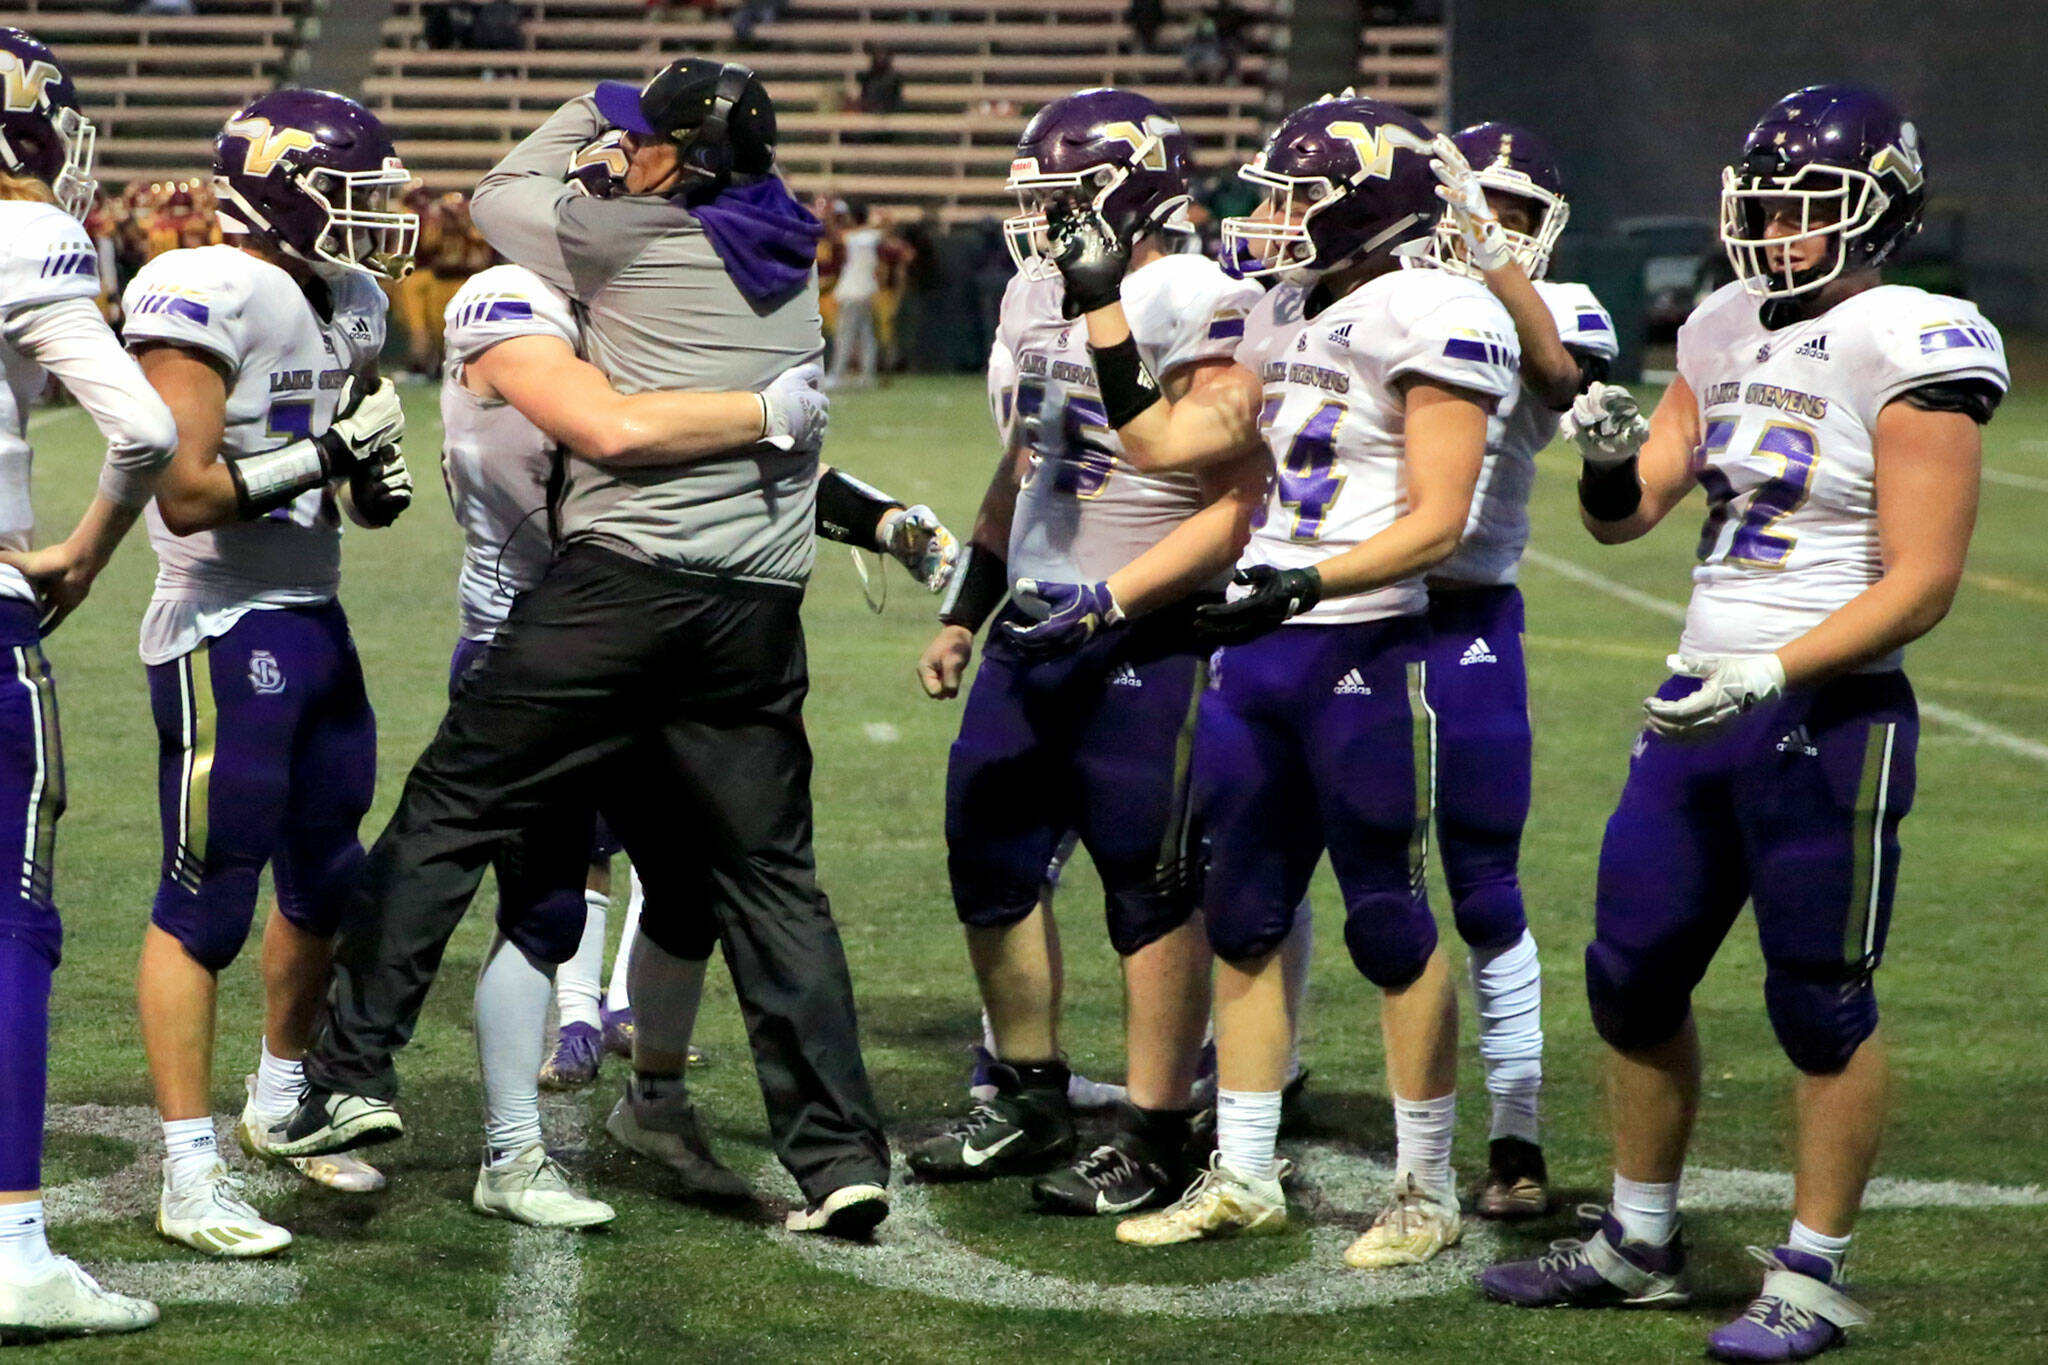 Lake Stevens coach Tom Tri celebrates with his players. (Kevin Clark / The Herald)